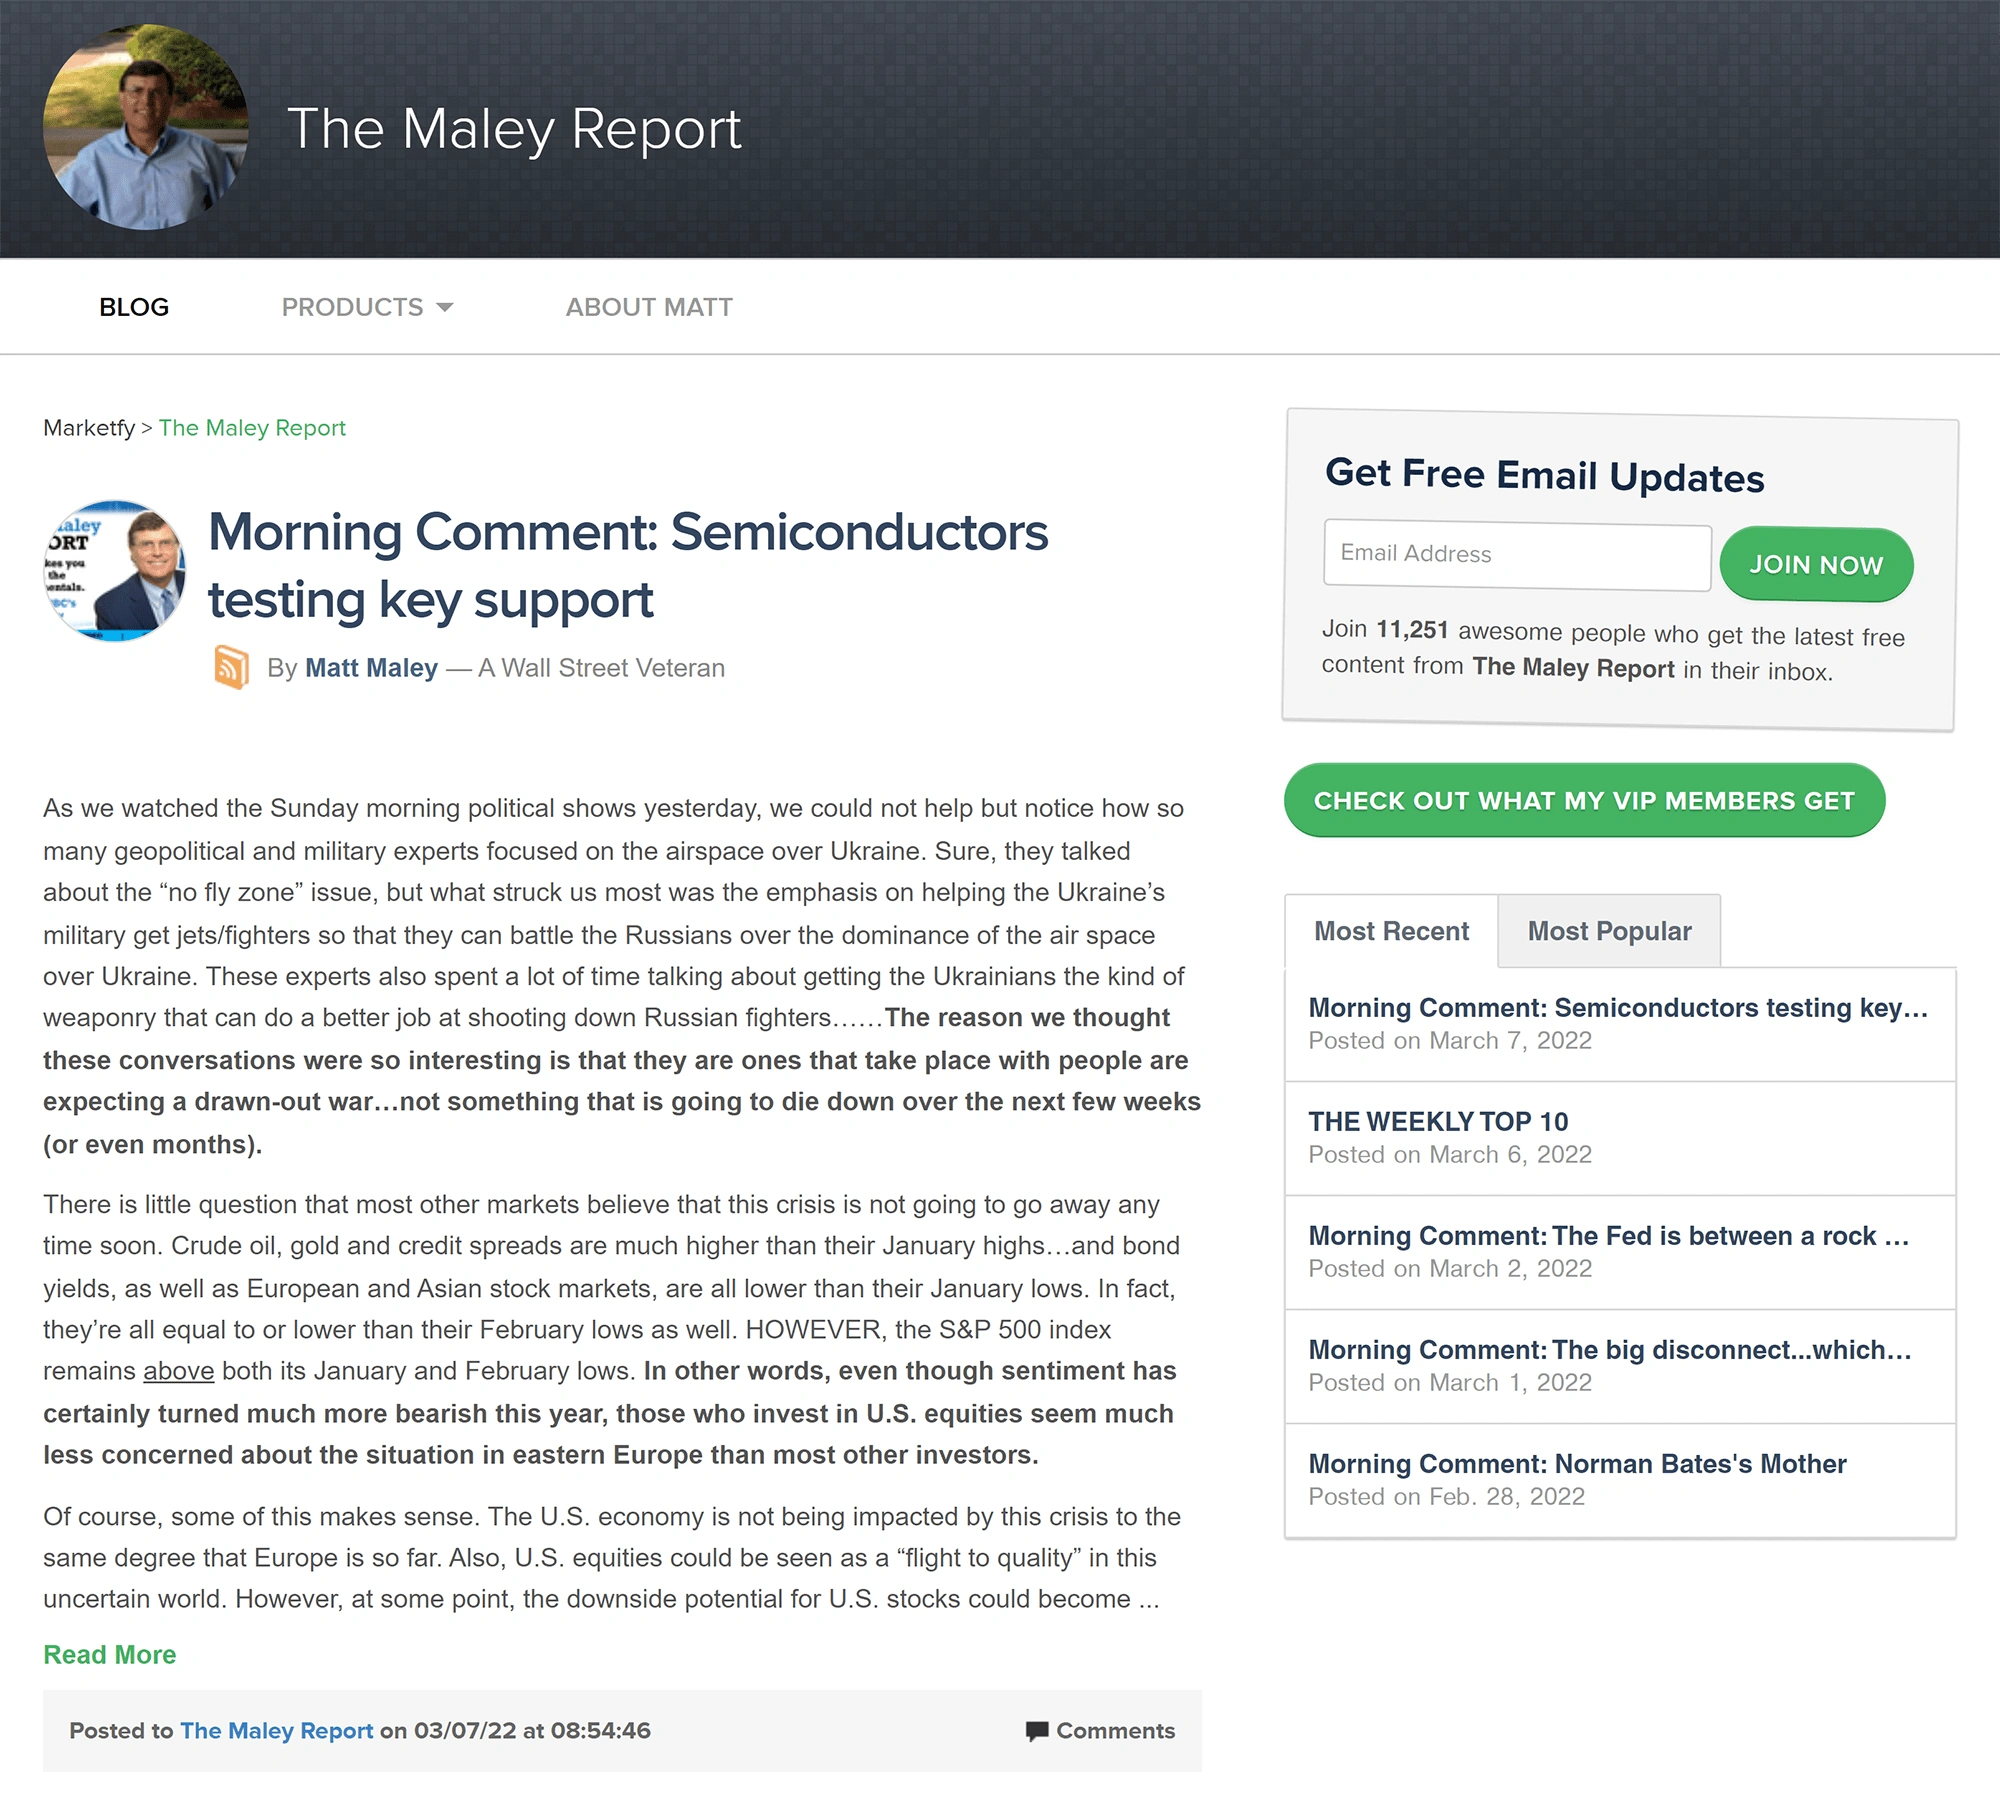 the-maley-report-min.png